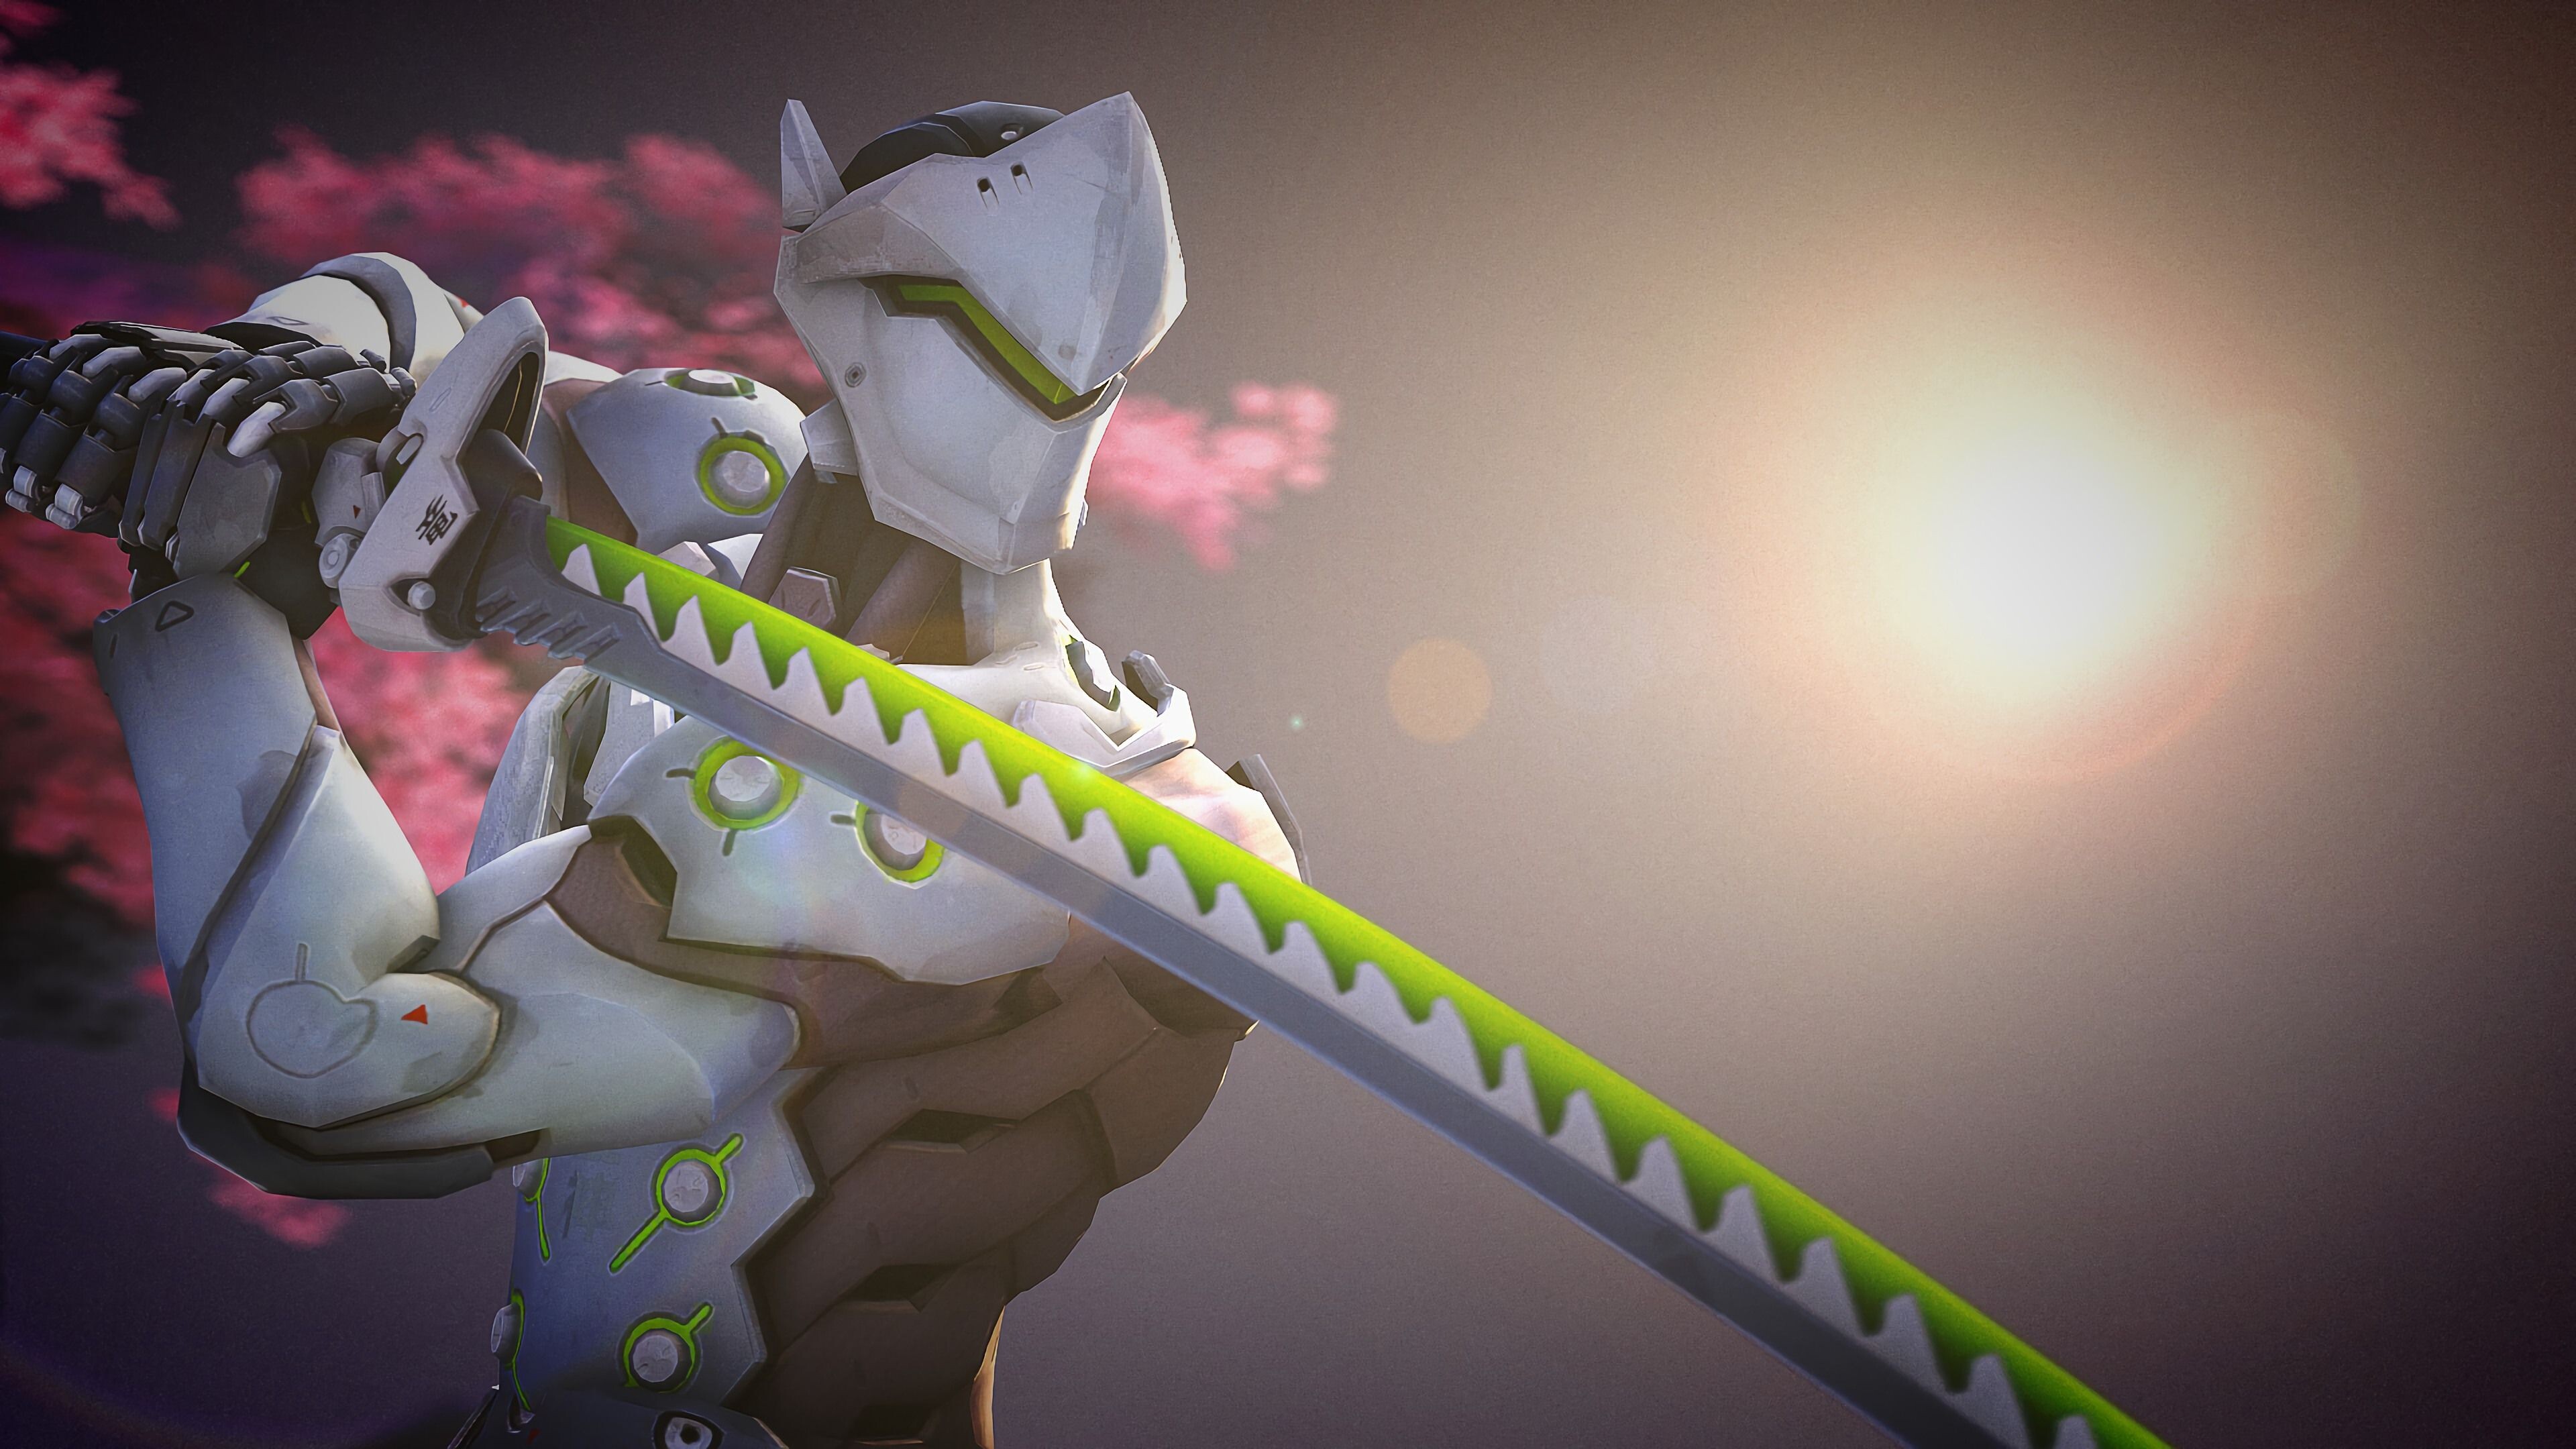 Genji: With secondary fire quickly throws three shurikens in a cone in front of him. 3840x2160 4K Wallpaper.